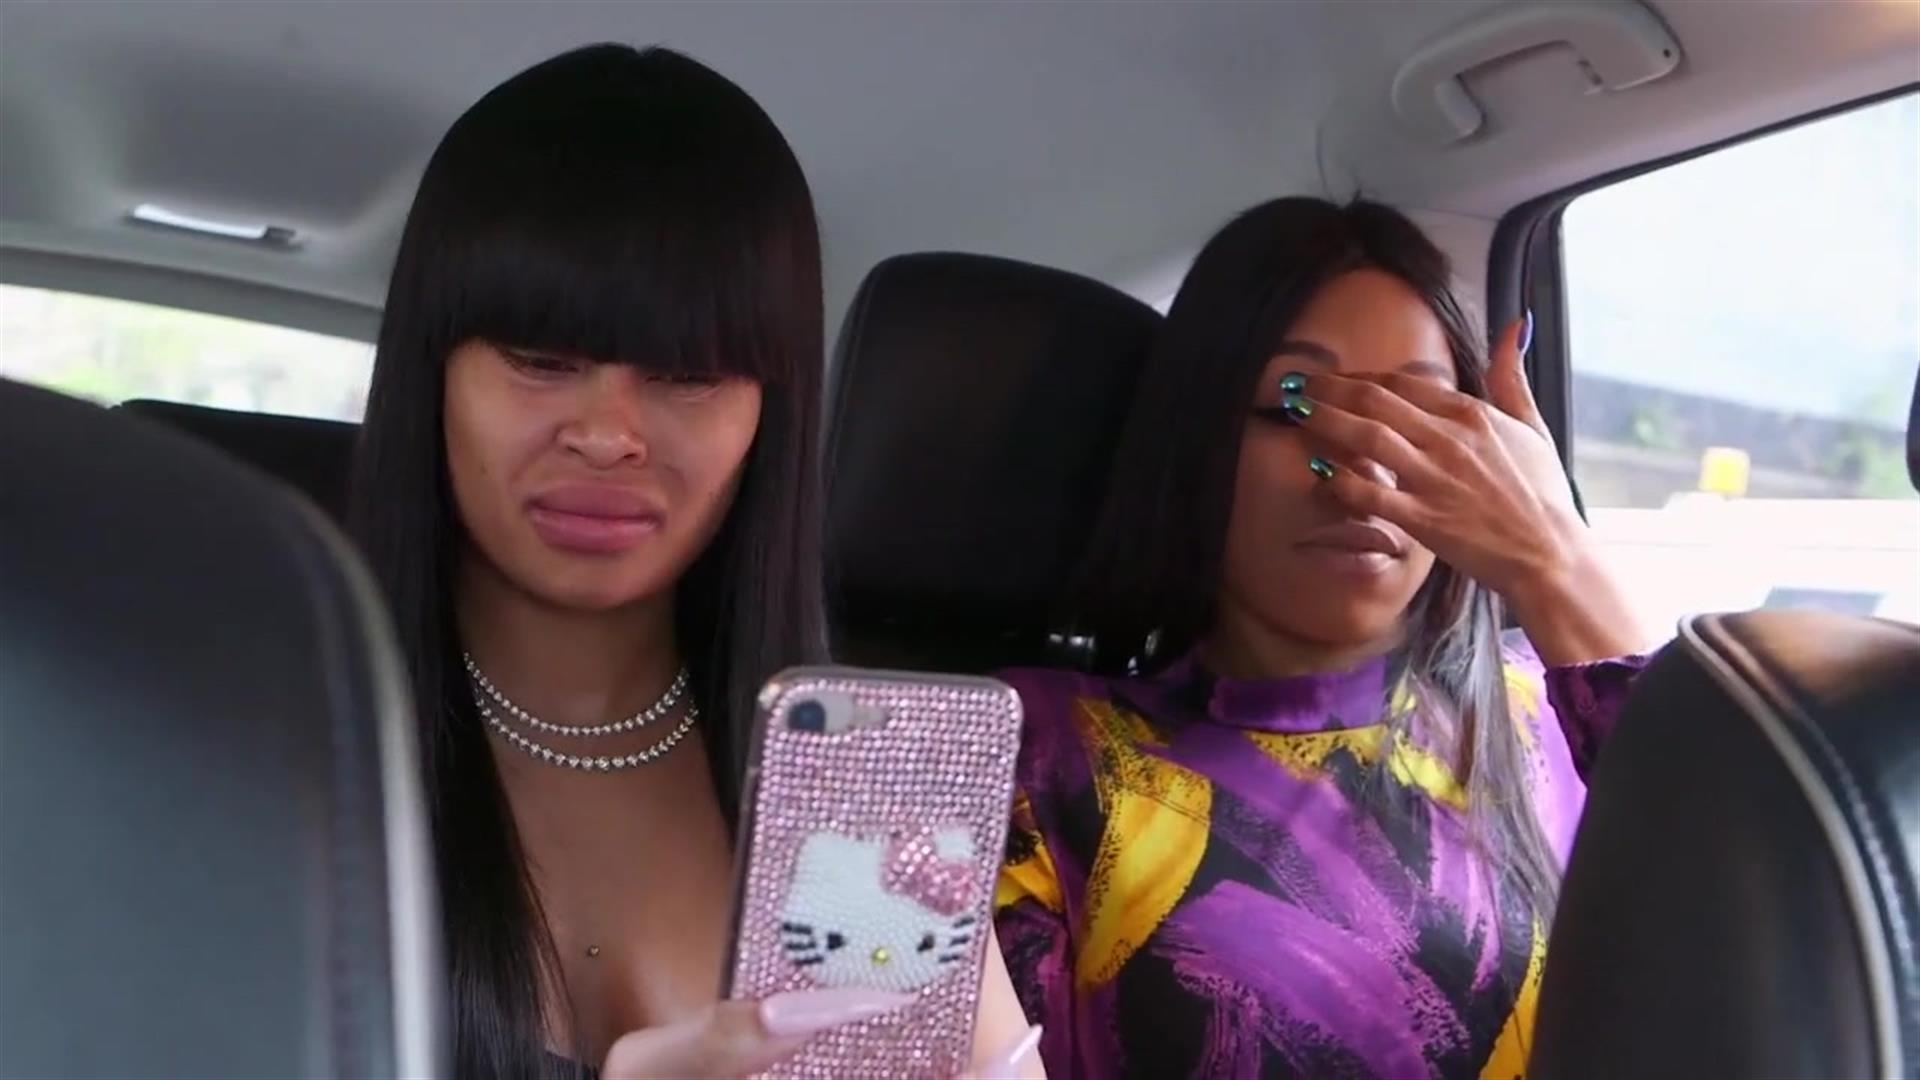 Watch Chyna's Team Is a Mess! | The Real Blac Chyna Video Extras